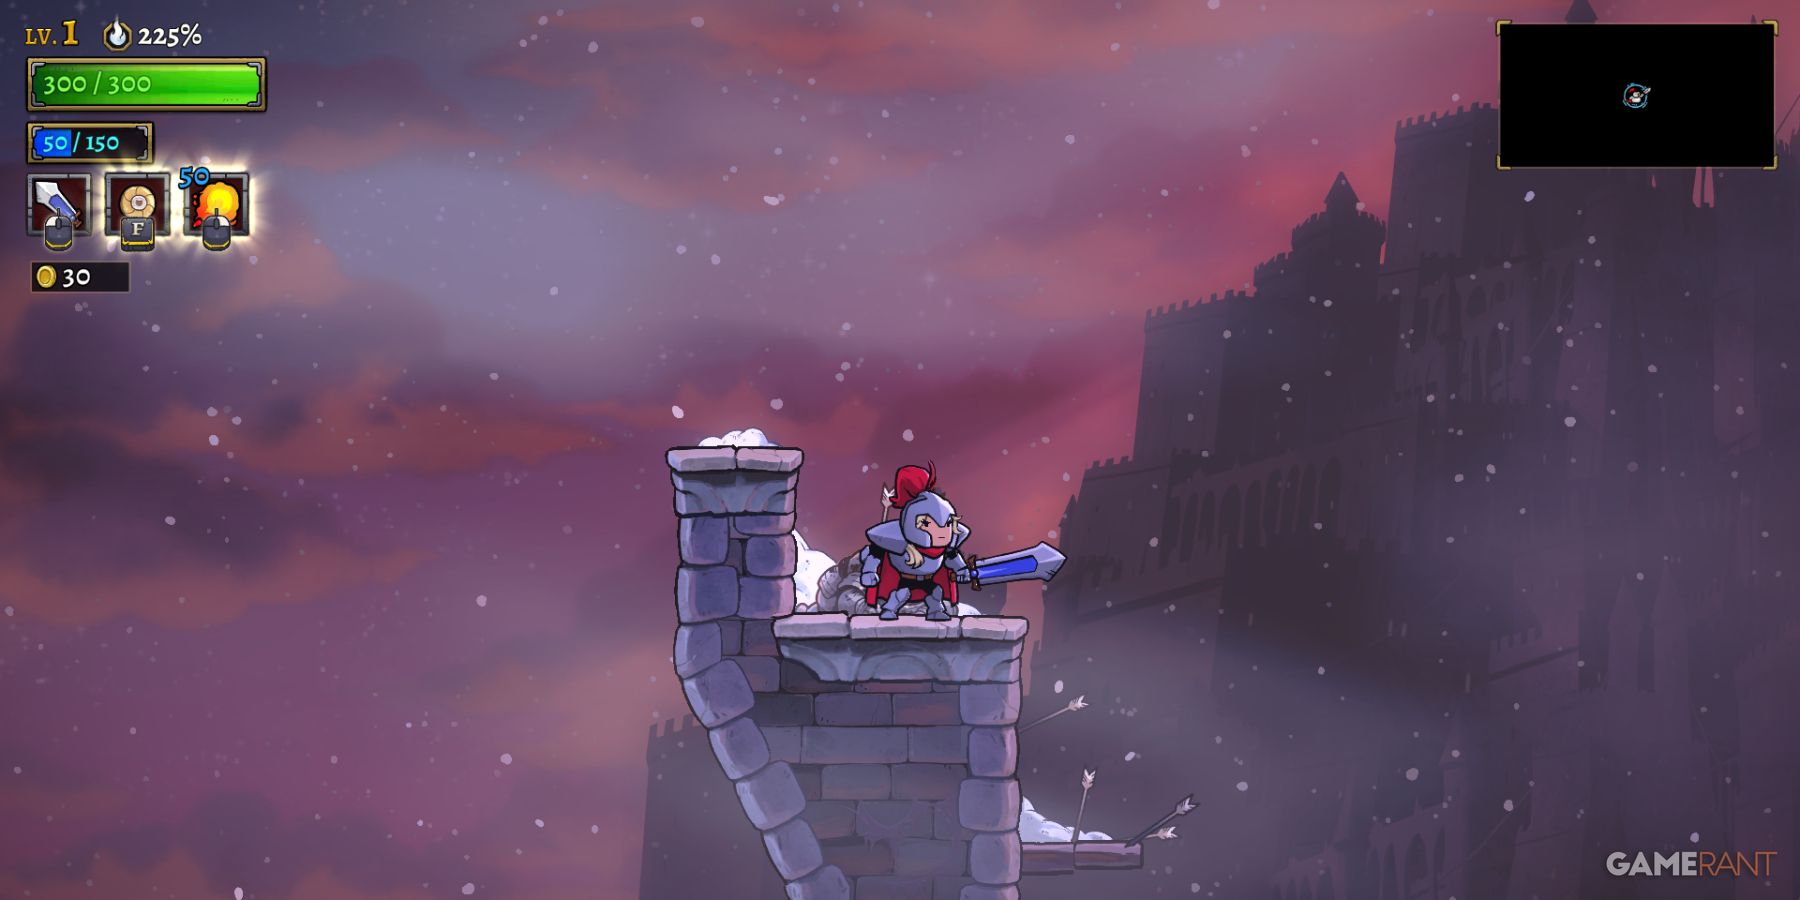 Protagonist using a armor in Rogue Legacy 2